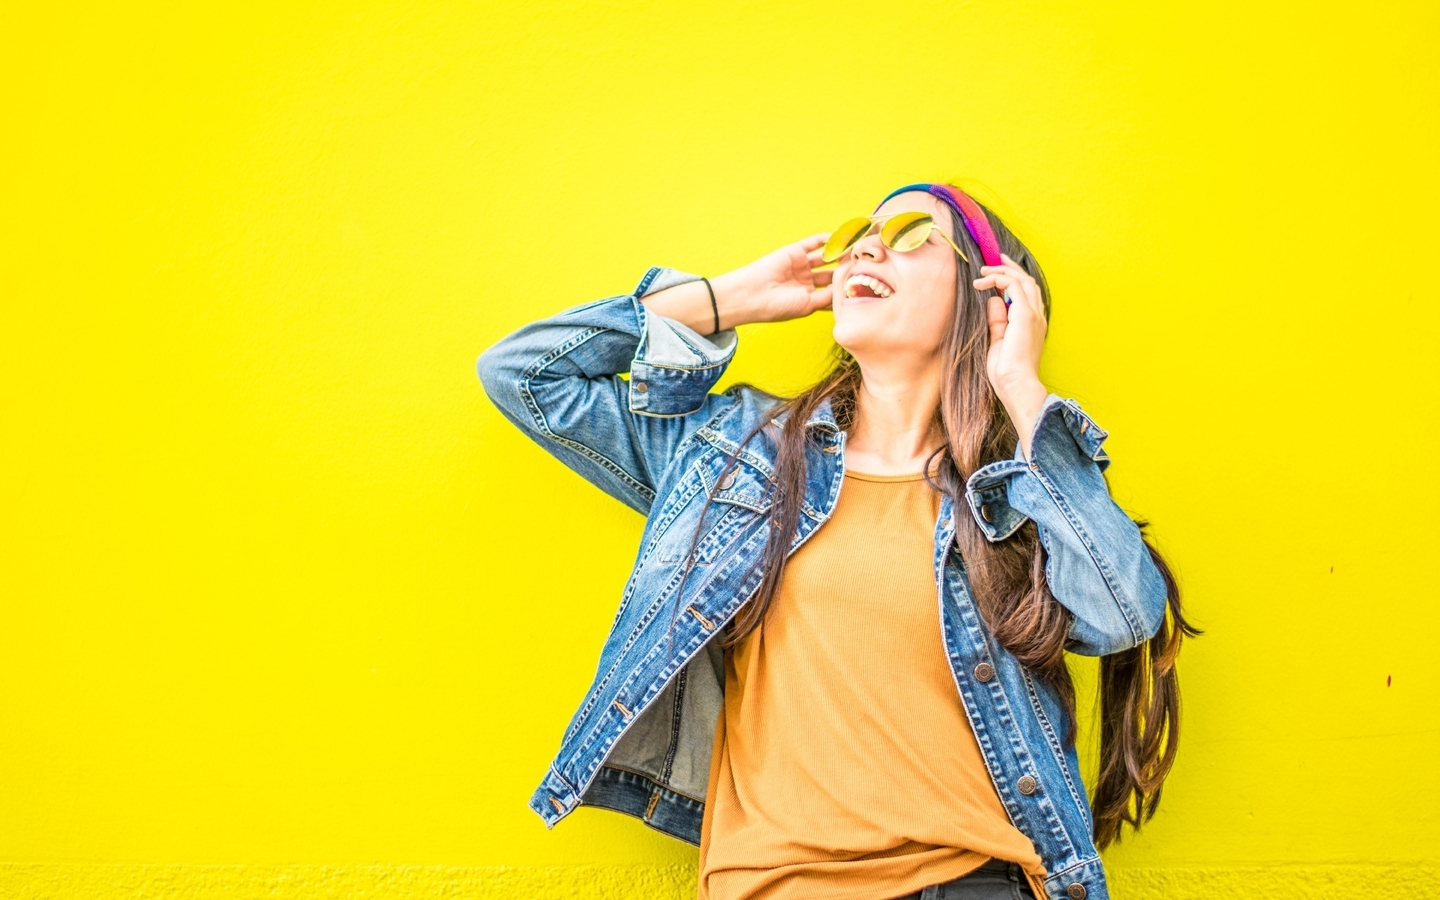 Image: Fun, mood, girl, glasses, jeans, yellow background